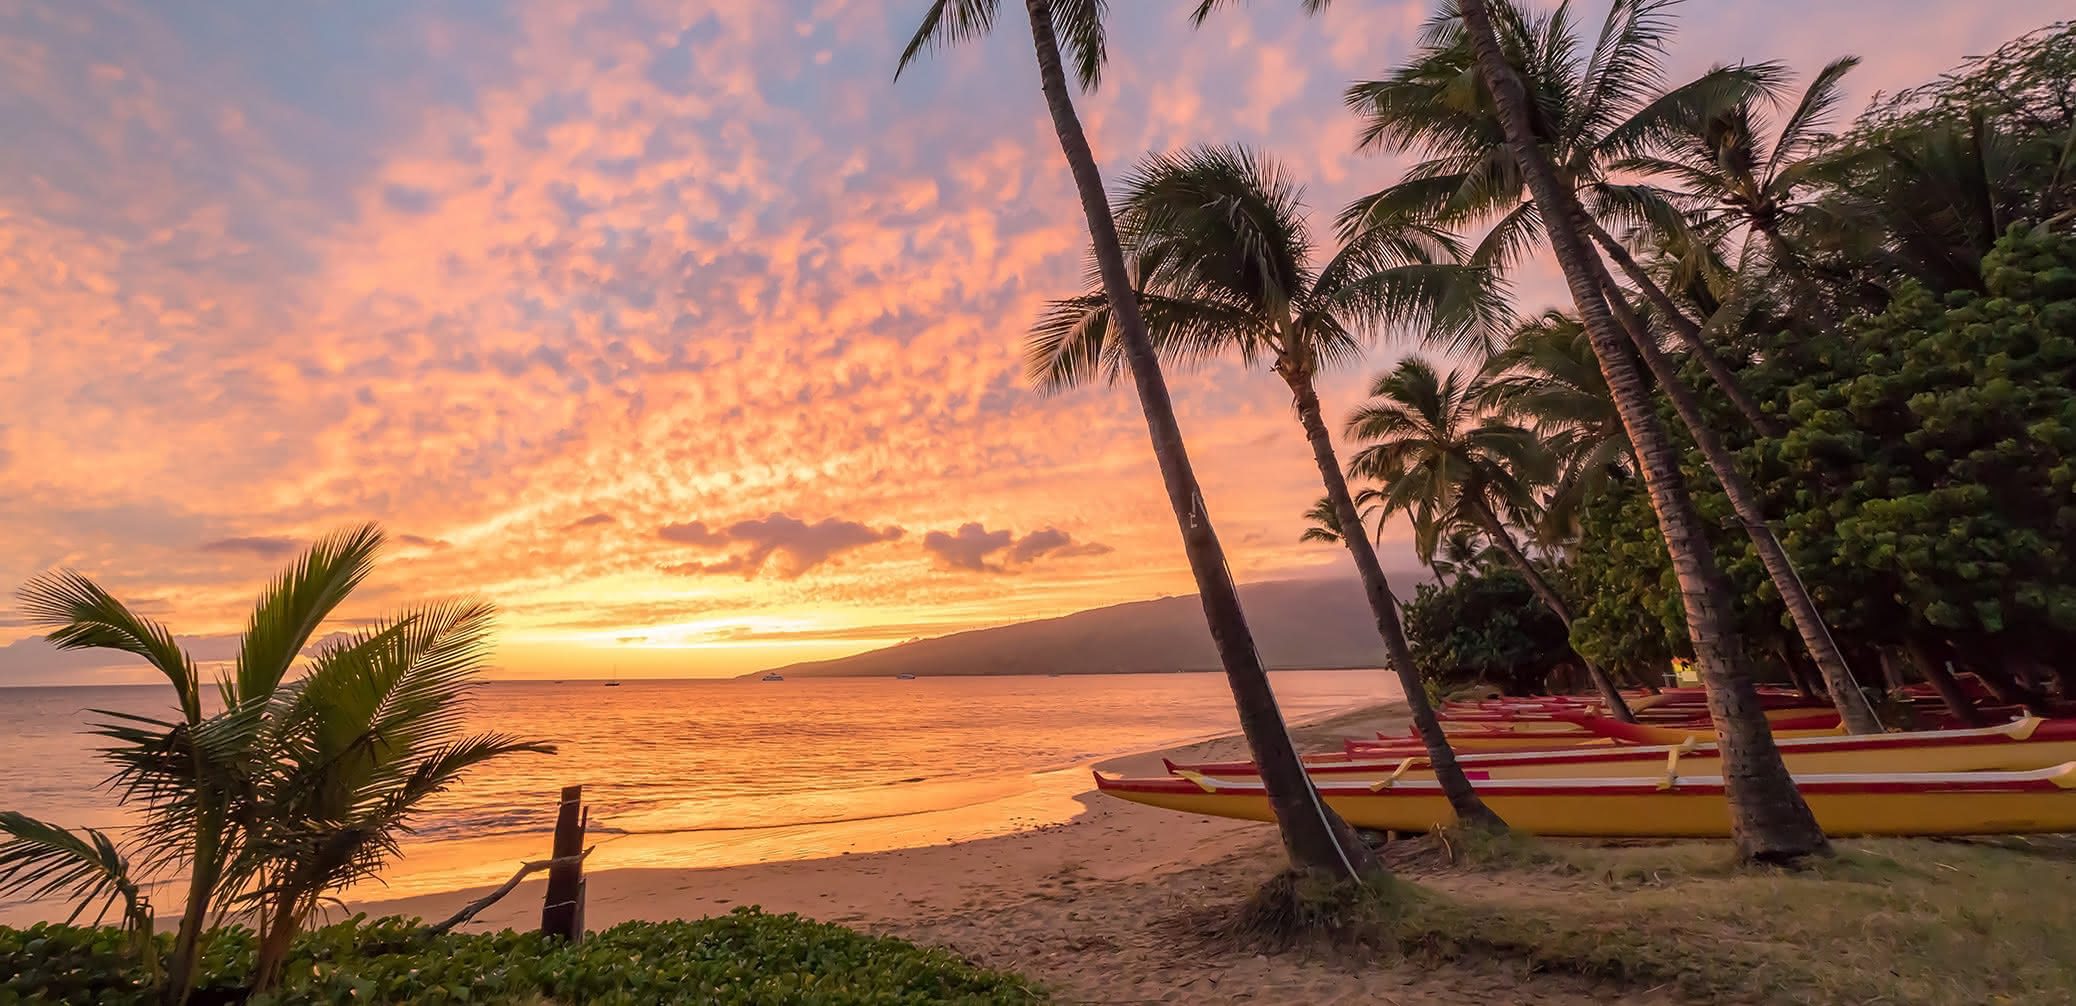 10-best-beaches-to-watch-the-sunset-in-maui